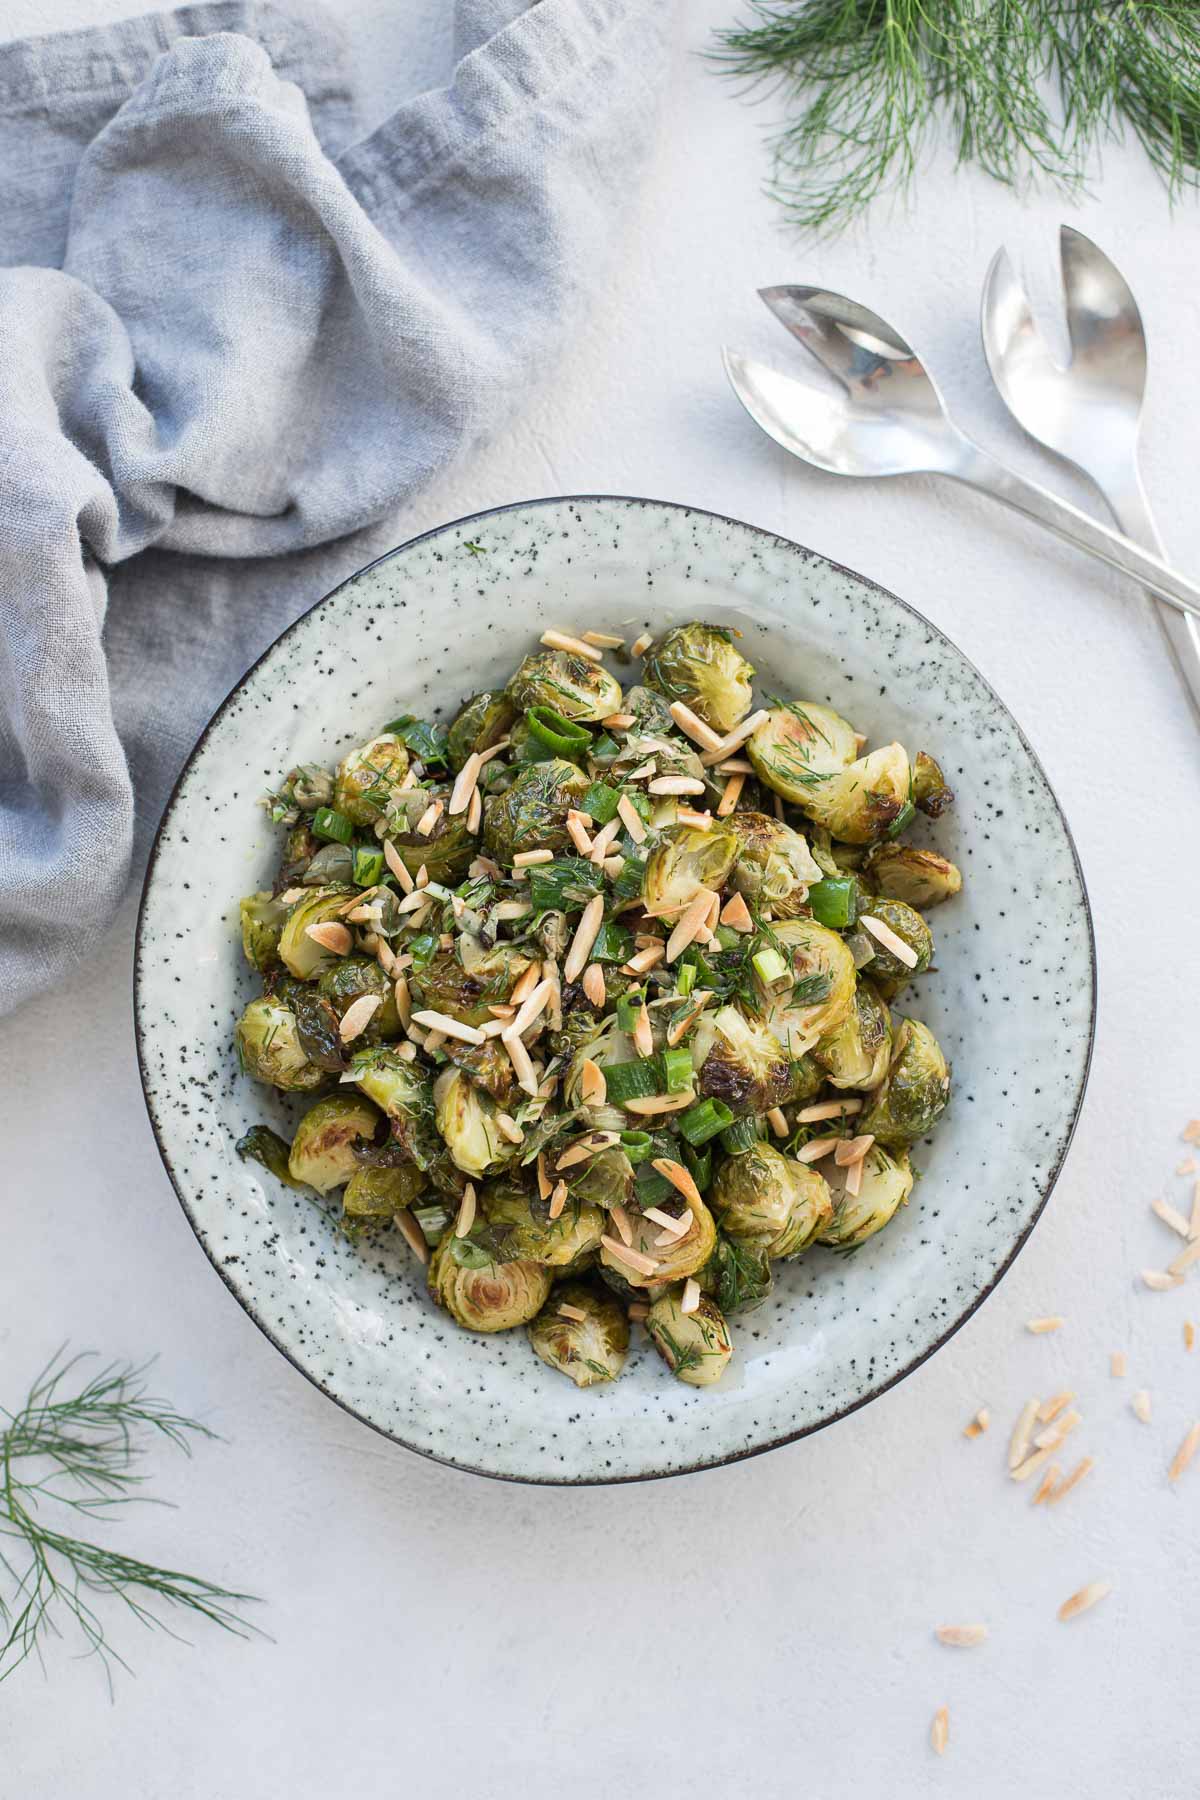 Mediterranean Style Roasted Brussels Sprouts with Capers, Dill & Lemon